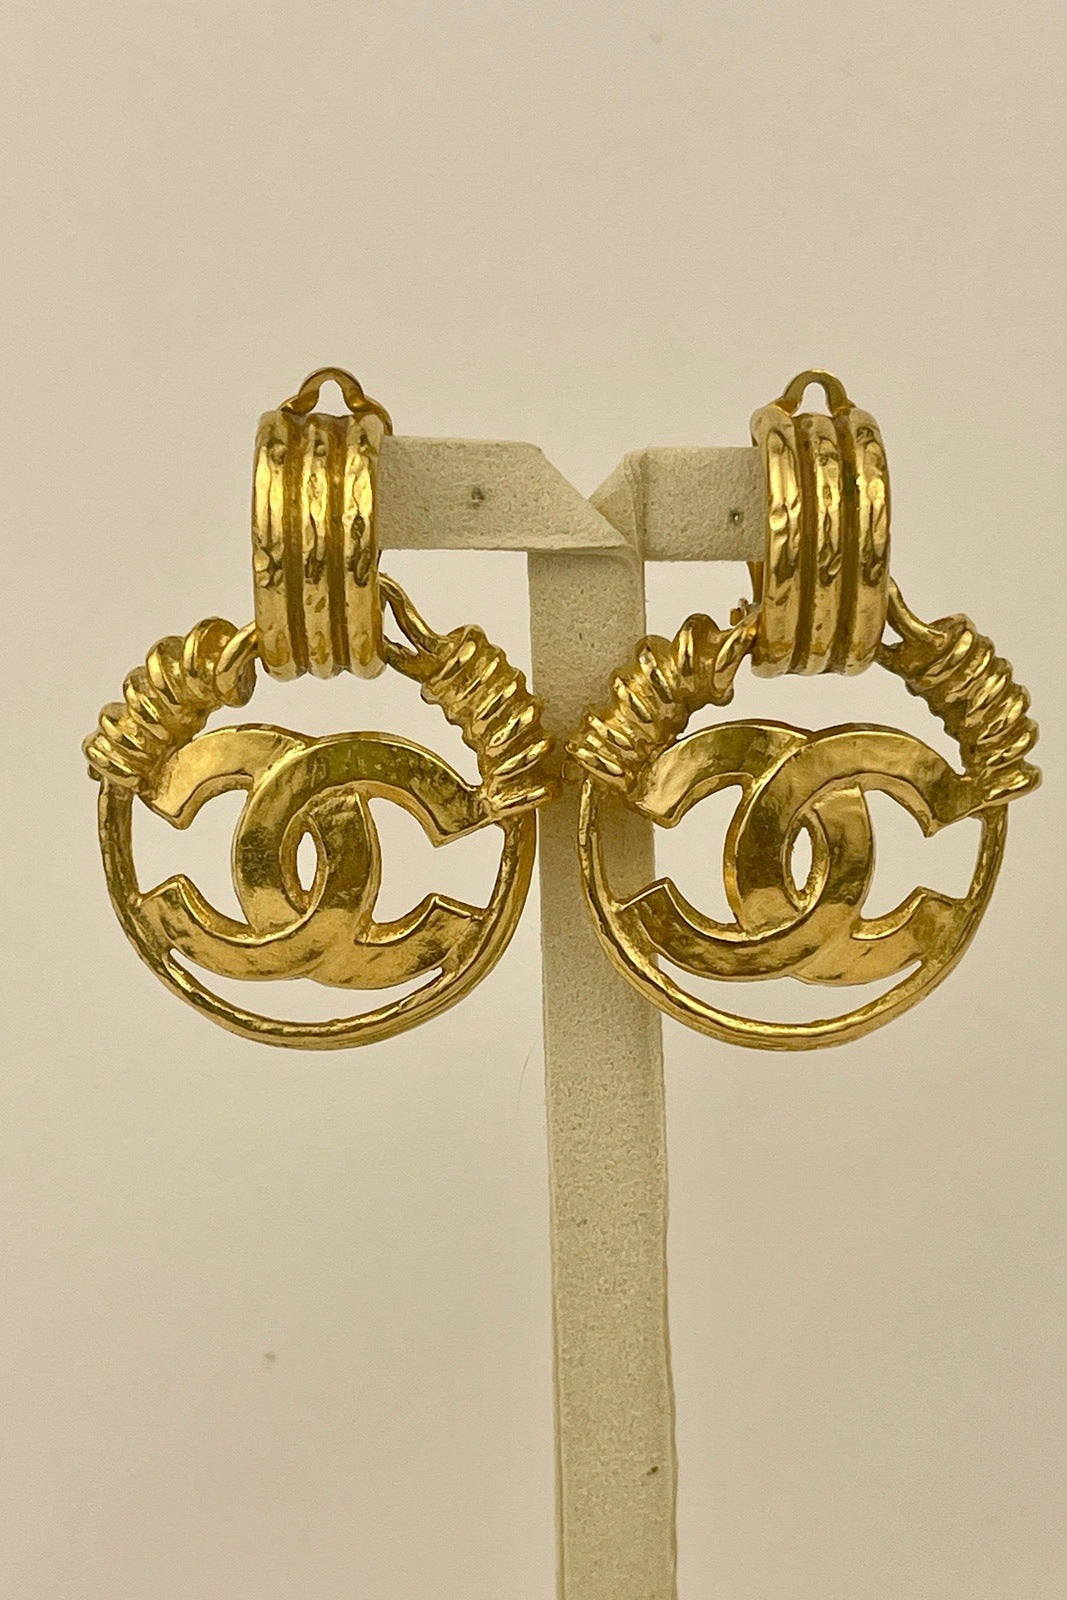 Chanel CC Round Chain Clip on Earrings 93P Vintage Gold